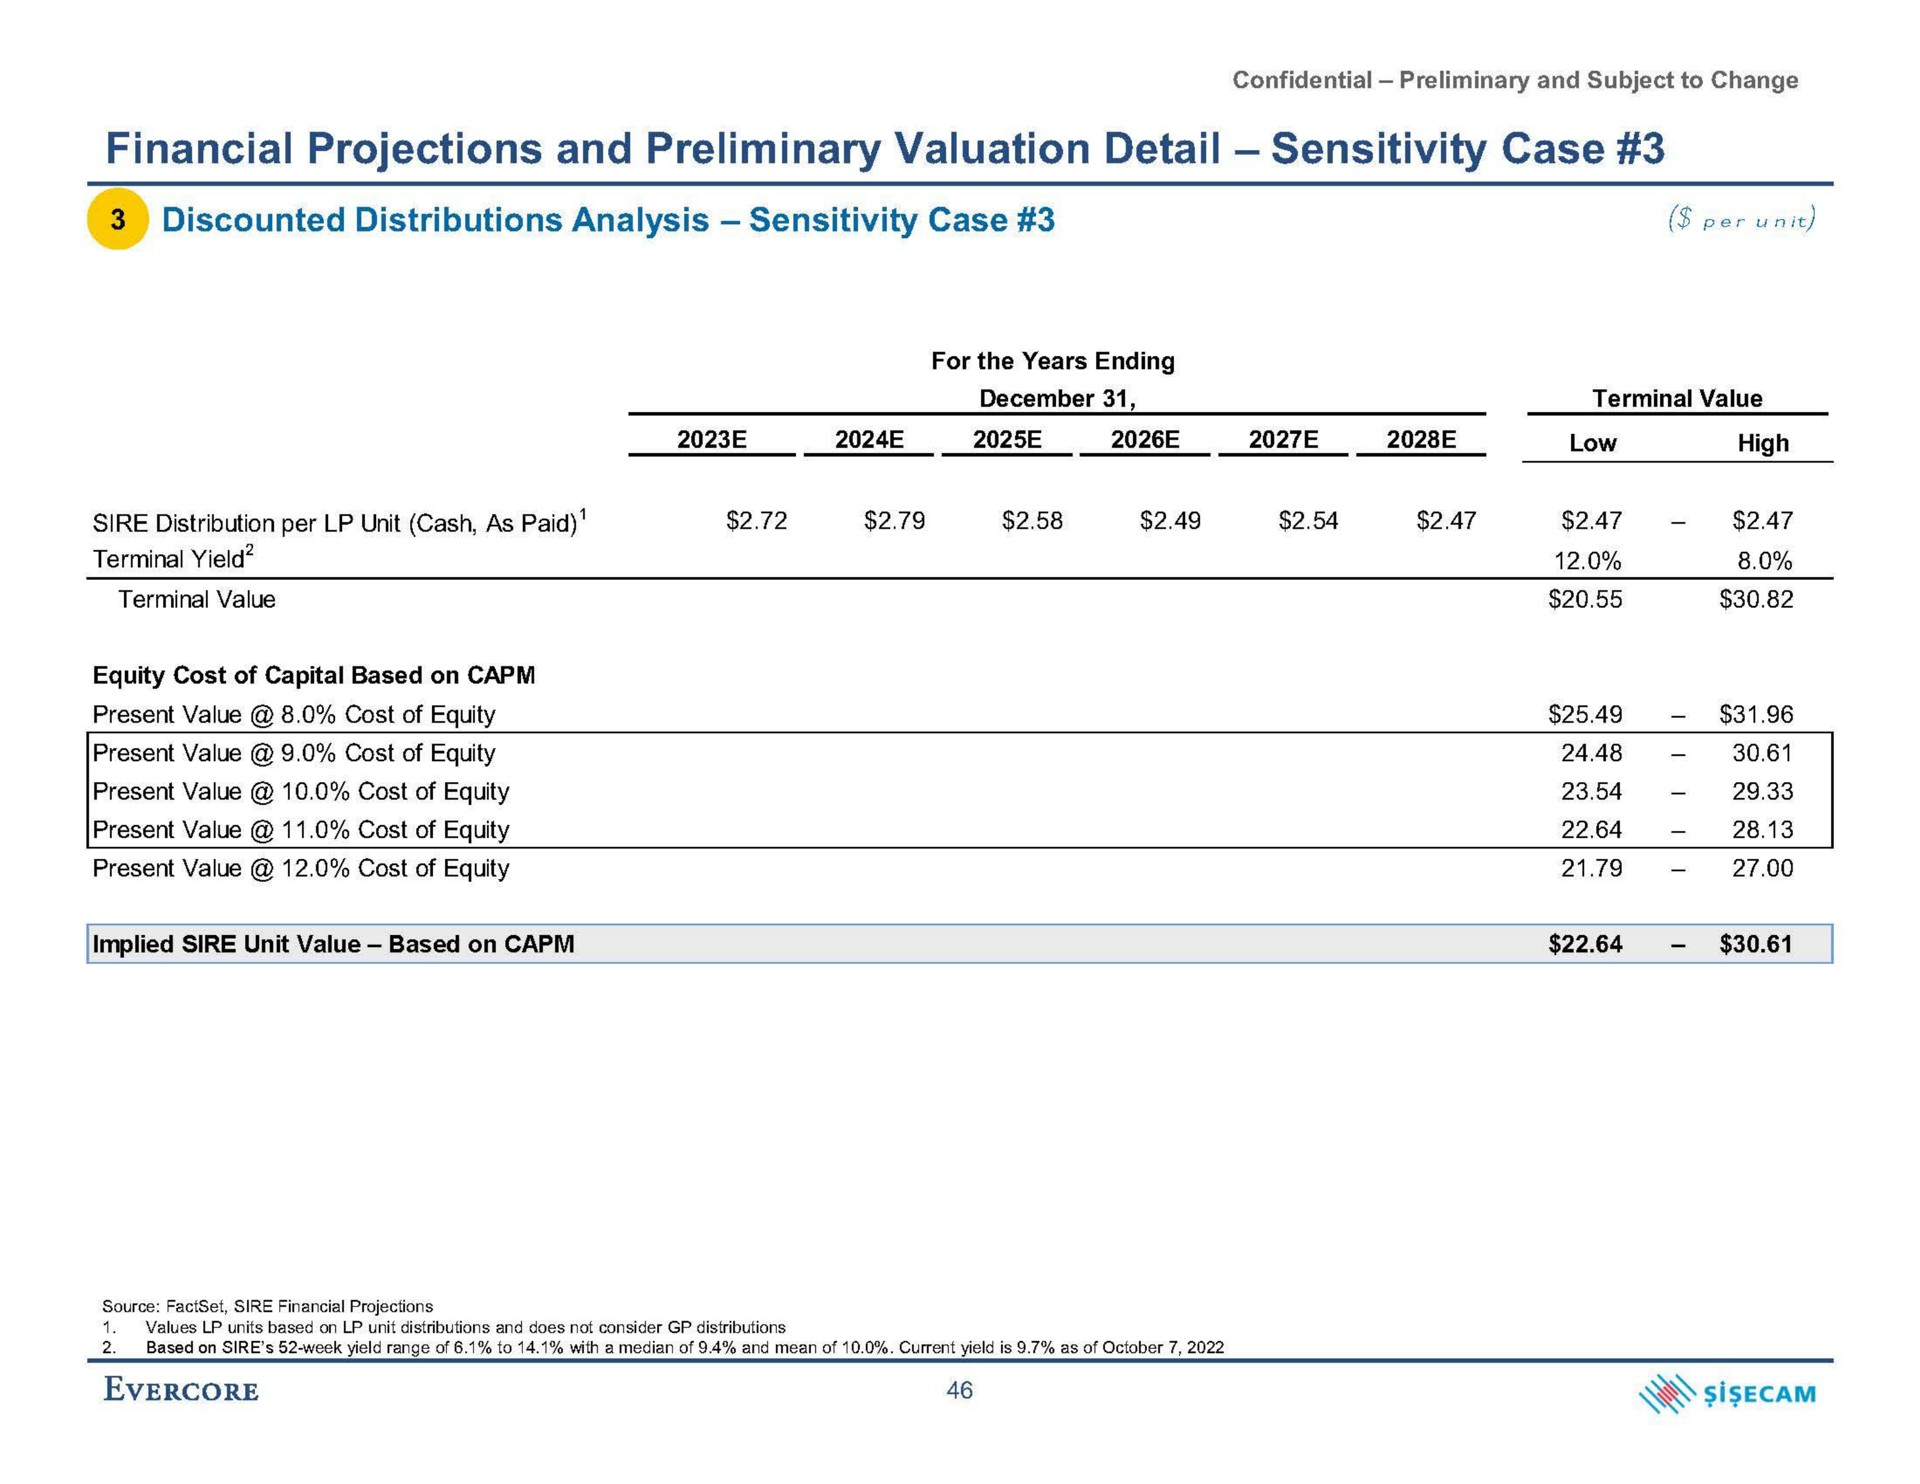 financial projections and preliminary valuation detail sensitivity case discounted distributions analysis sensitivity case per unit | Evercore